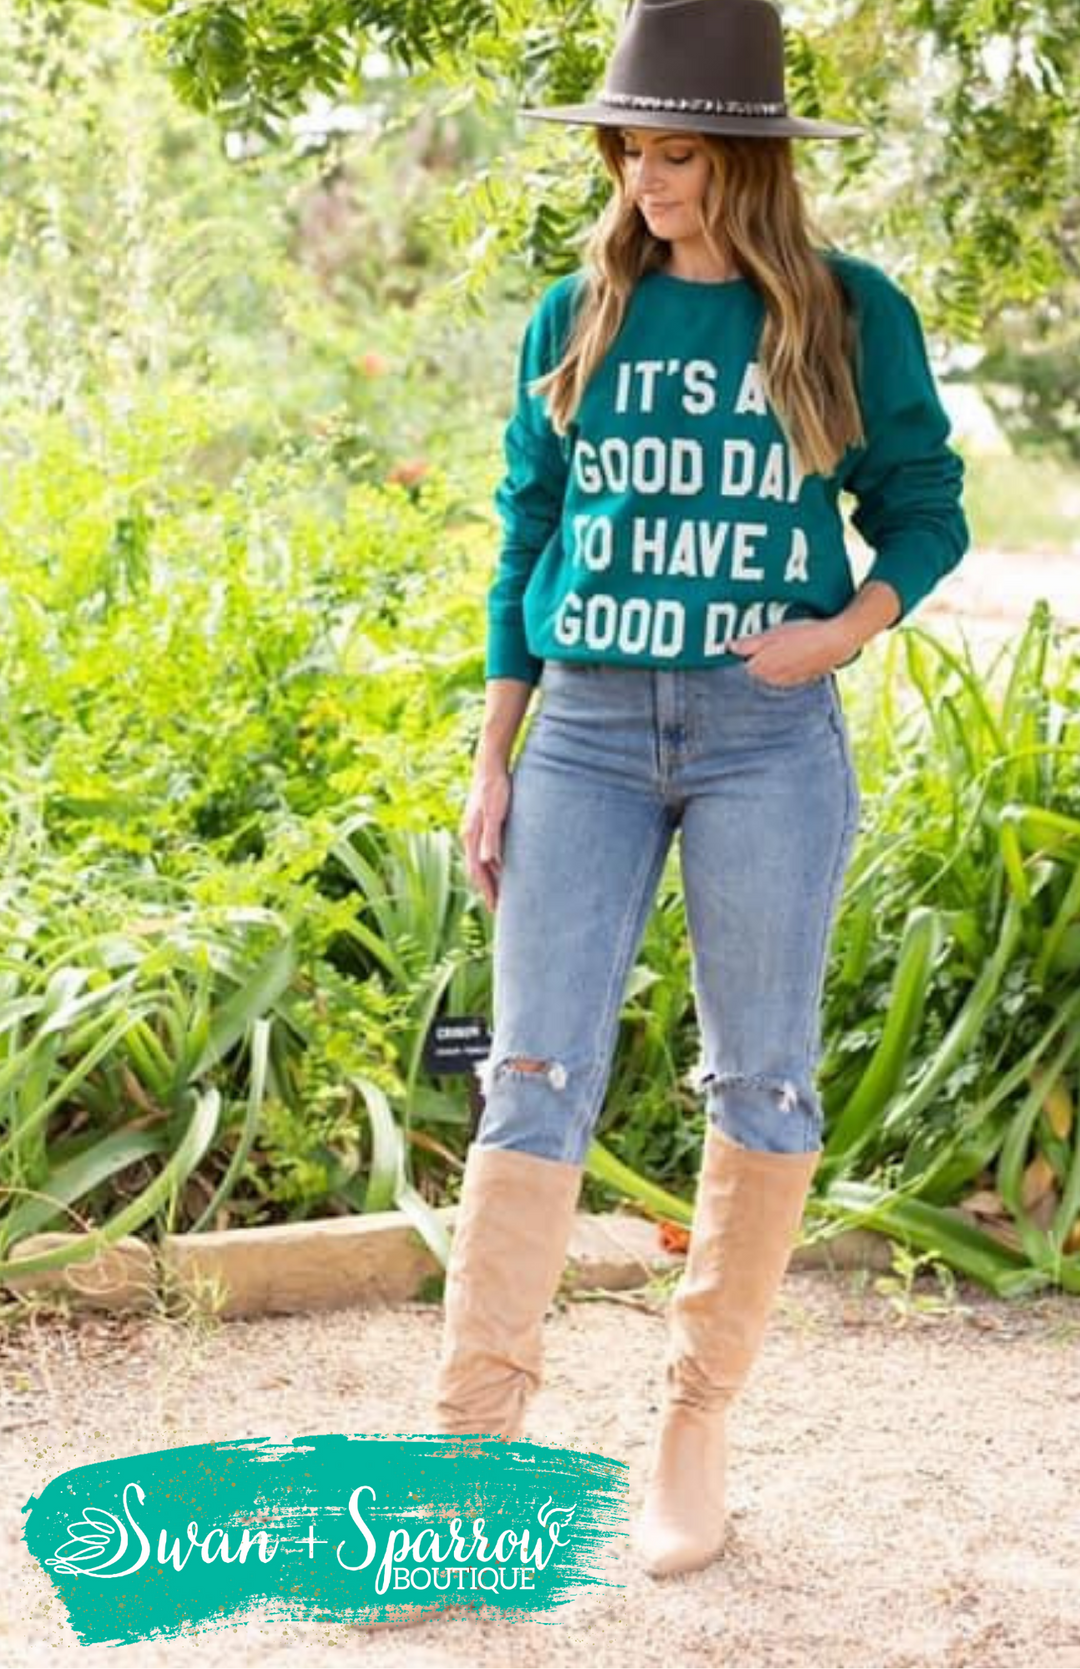 It's a Good Day to have a Good Day Sweatshirt